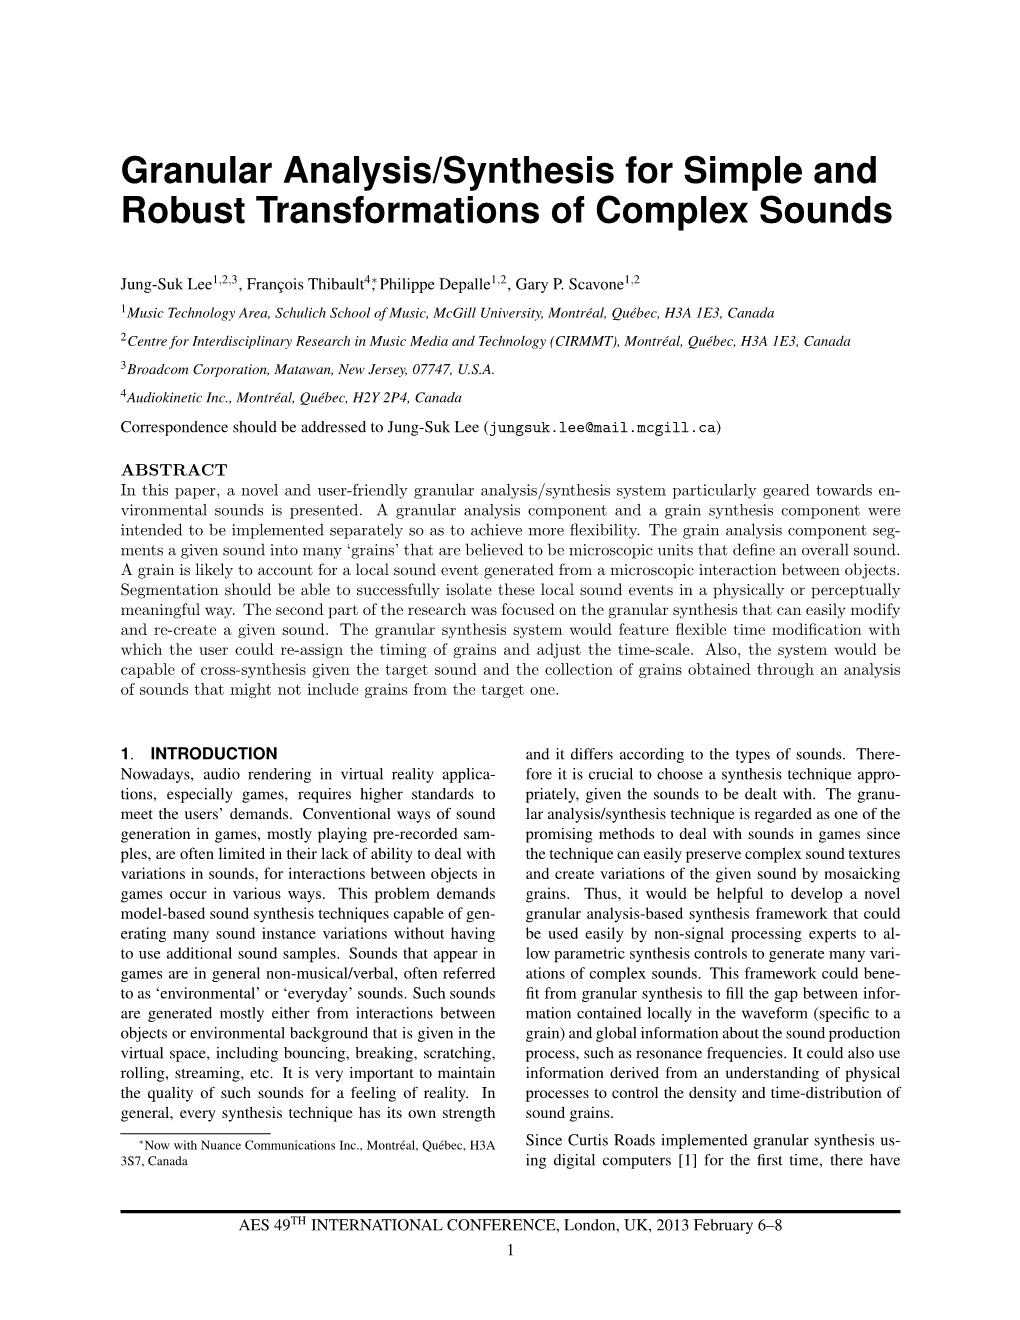 Granular Analysis/Synthesis for Simple and Robust Transformations of Complex Sounds